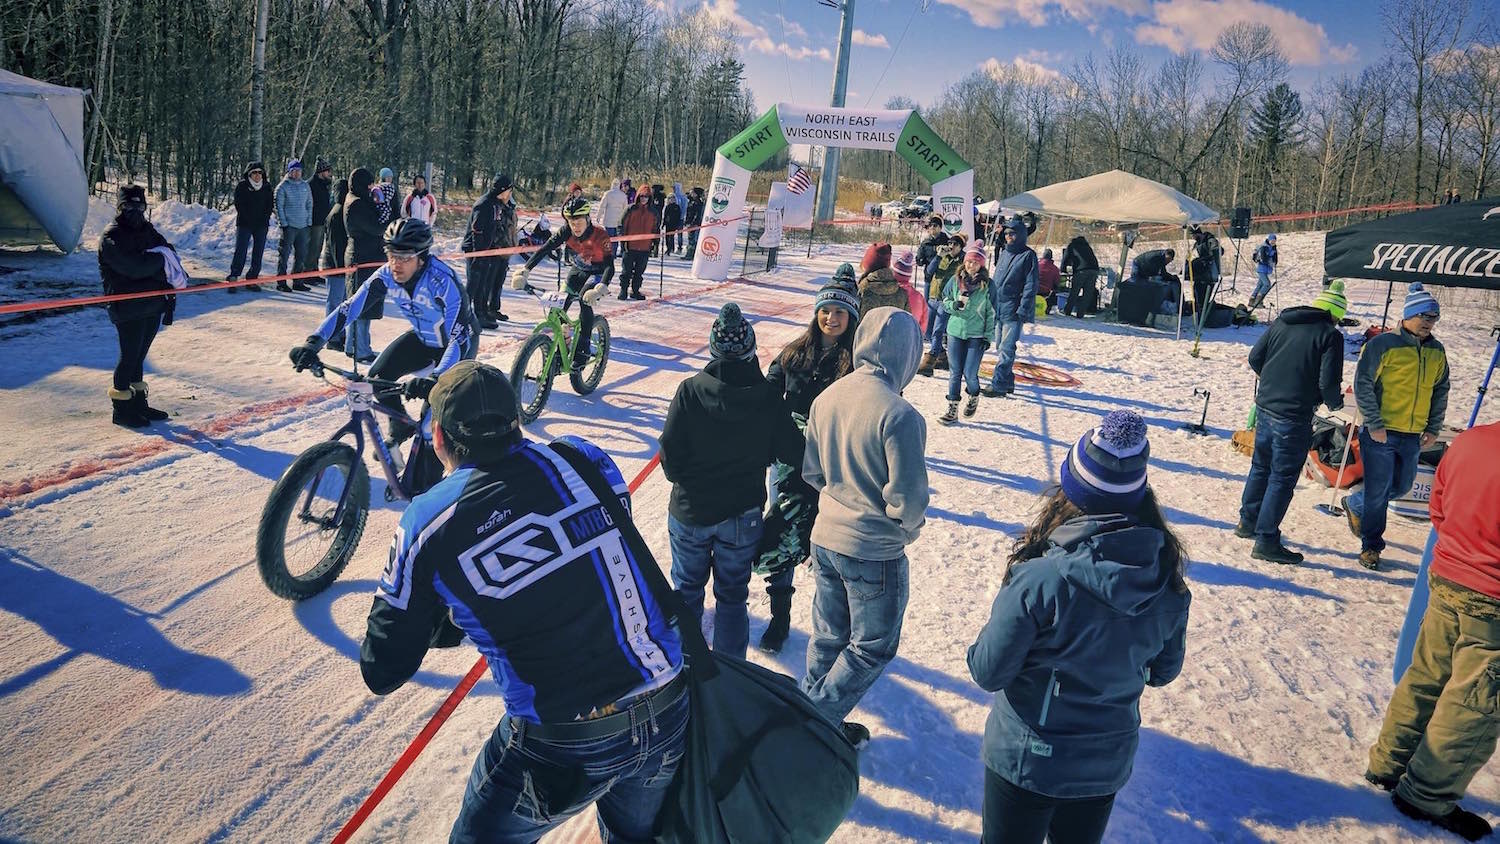 The crowd cheers on competitors at the start/finish line of the Fat Cupid Classic fat bike race.